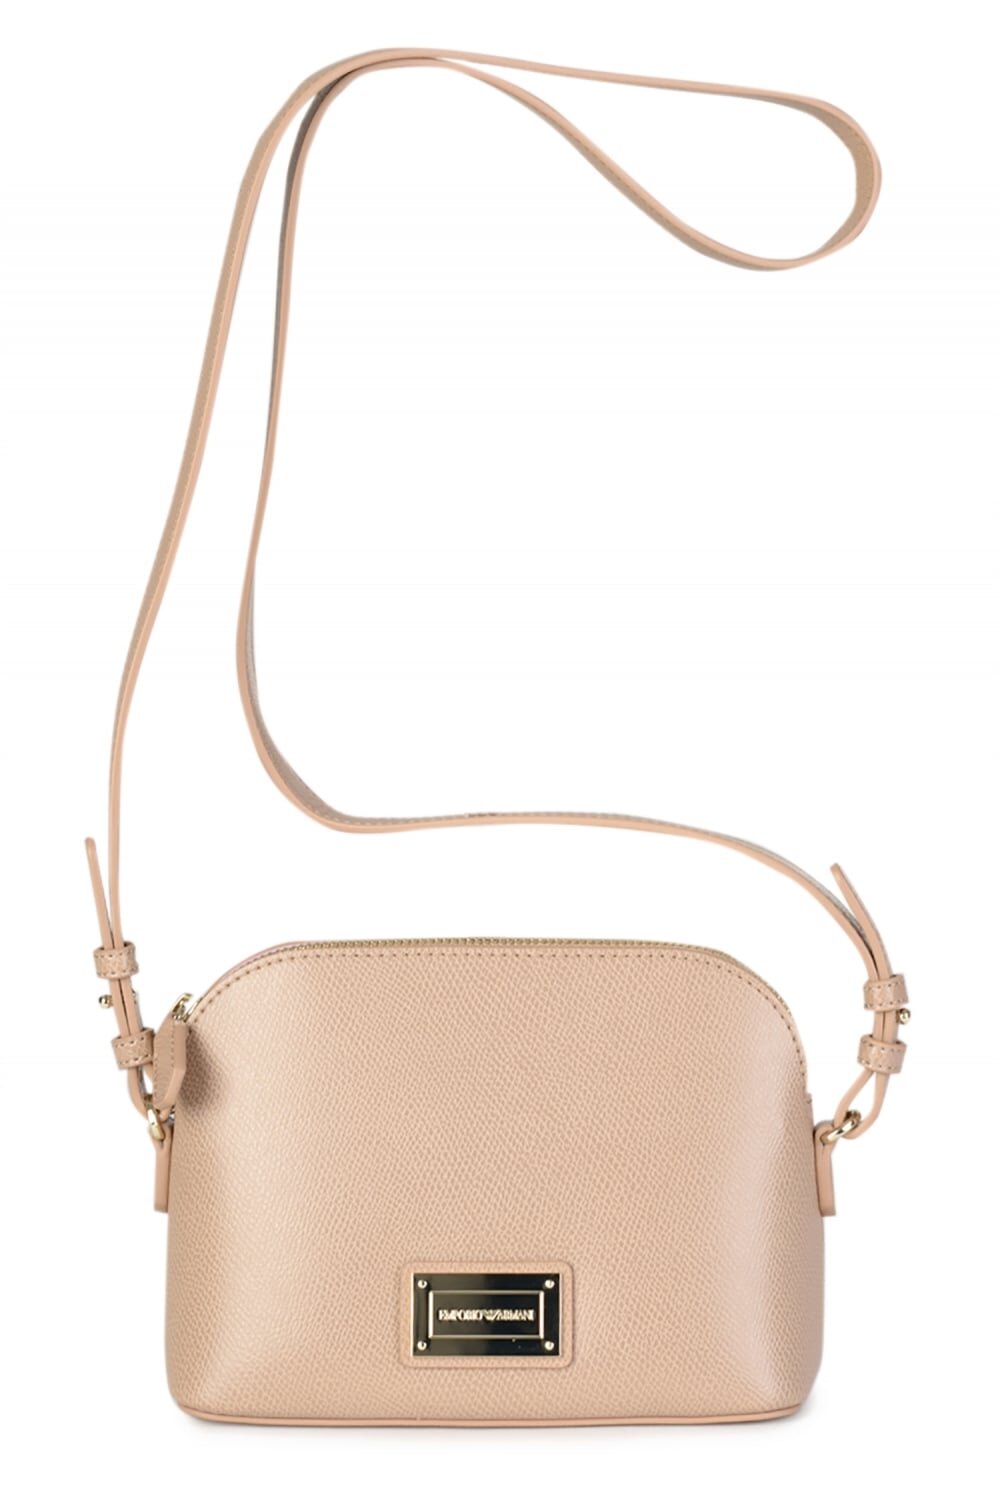 emporio-armani-womens-nude-sling-pouch-p41566-43118_zoom.jpeg